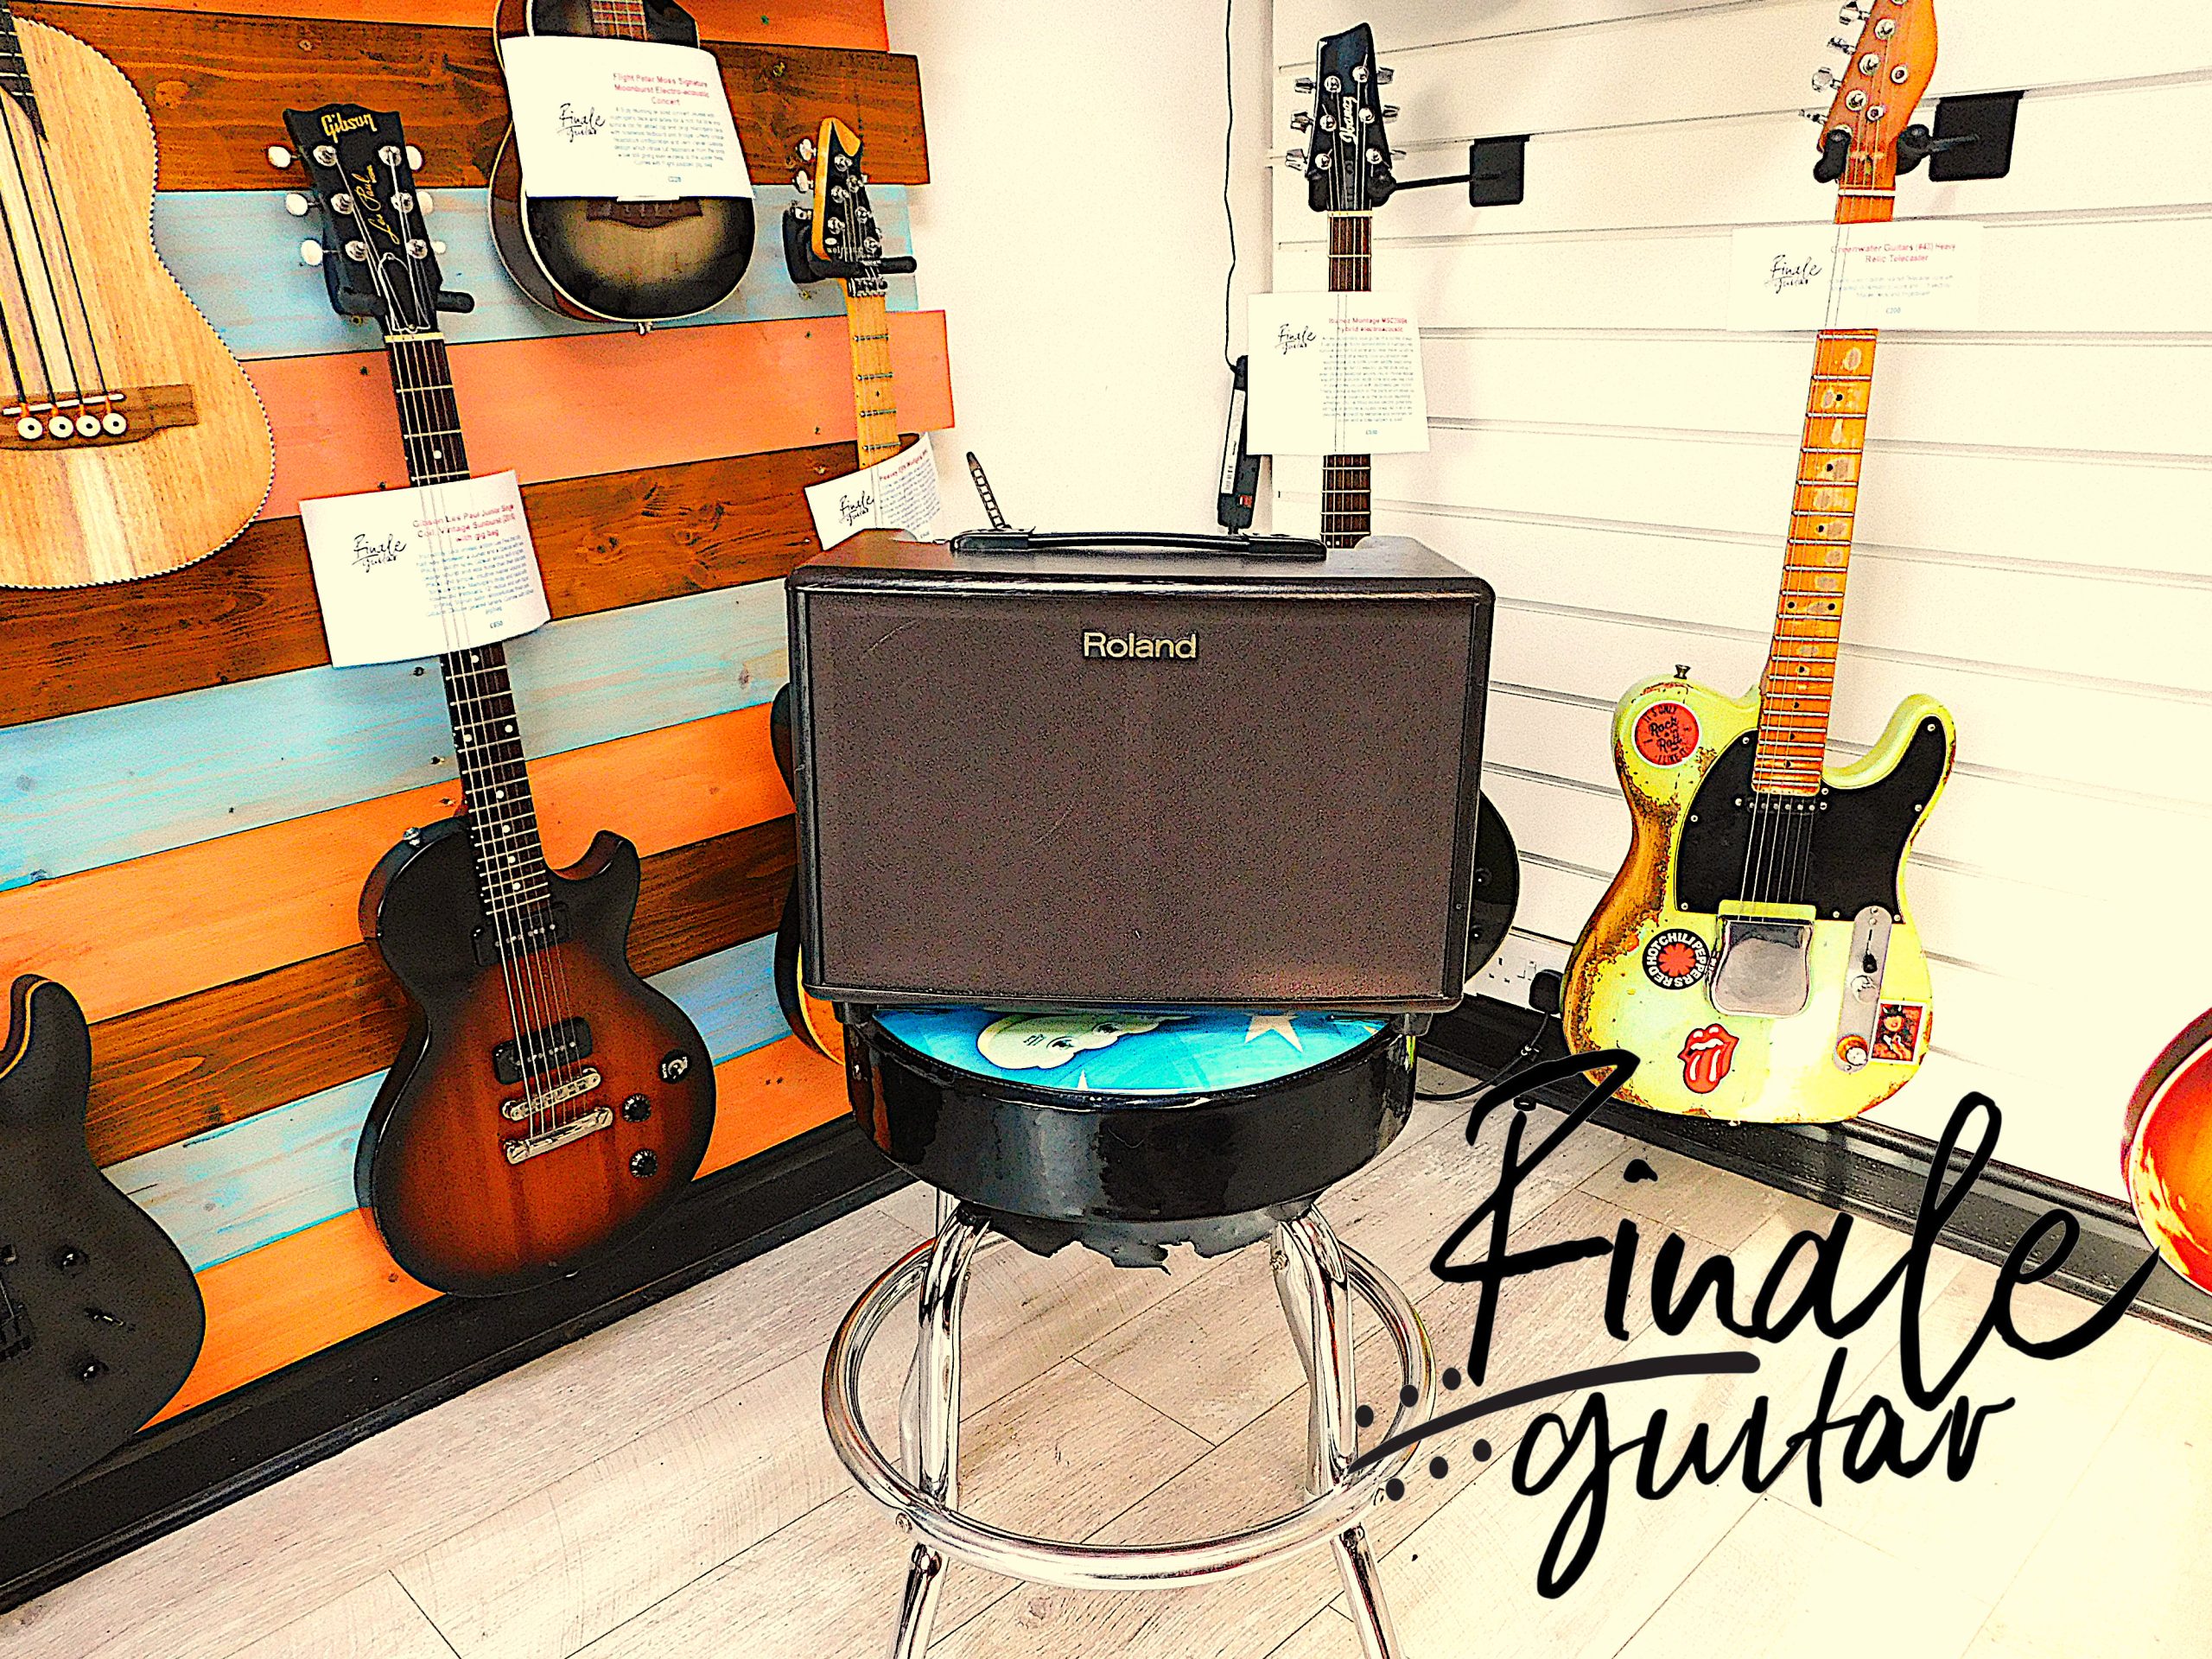 Roland AC60 acoustic amp with padded bag for sale in our Sheffield guitar shop, Finale Guitar